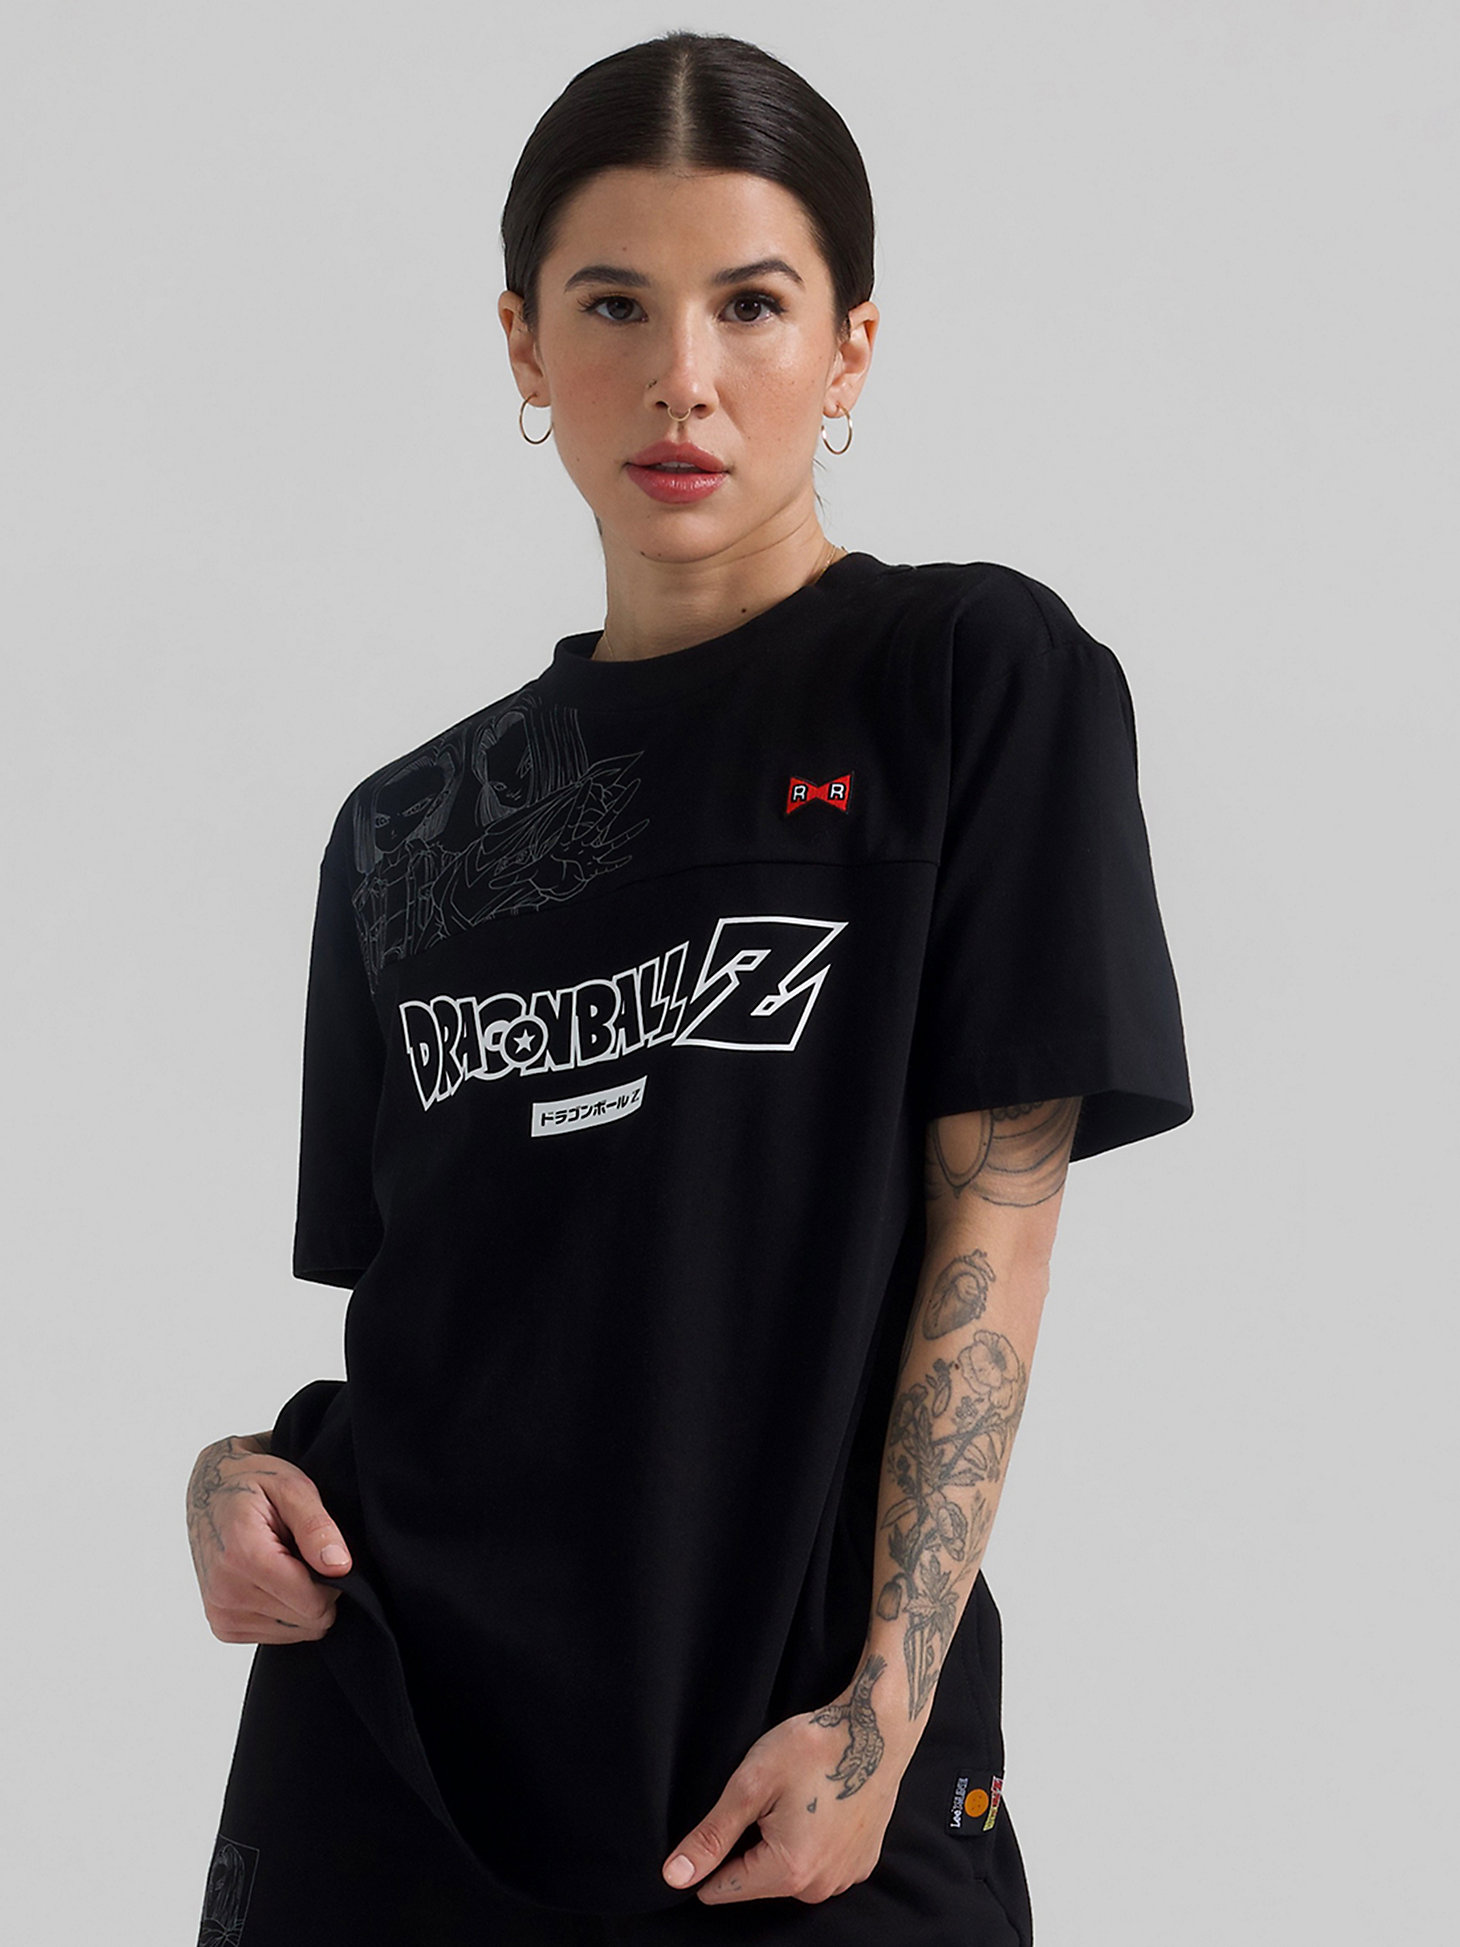 Unisex Lee and Dragon Ball Z Android Tee in Black alternative view 1